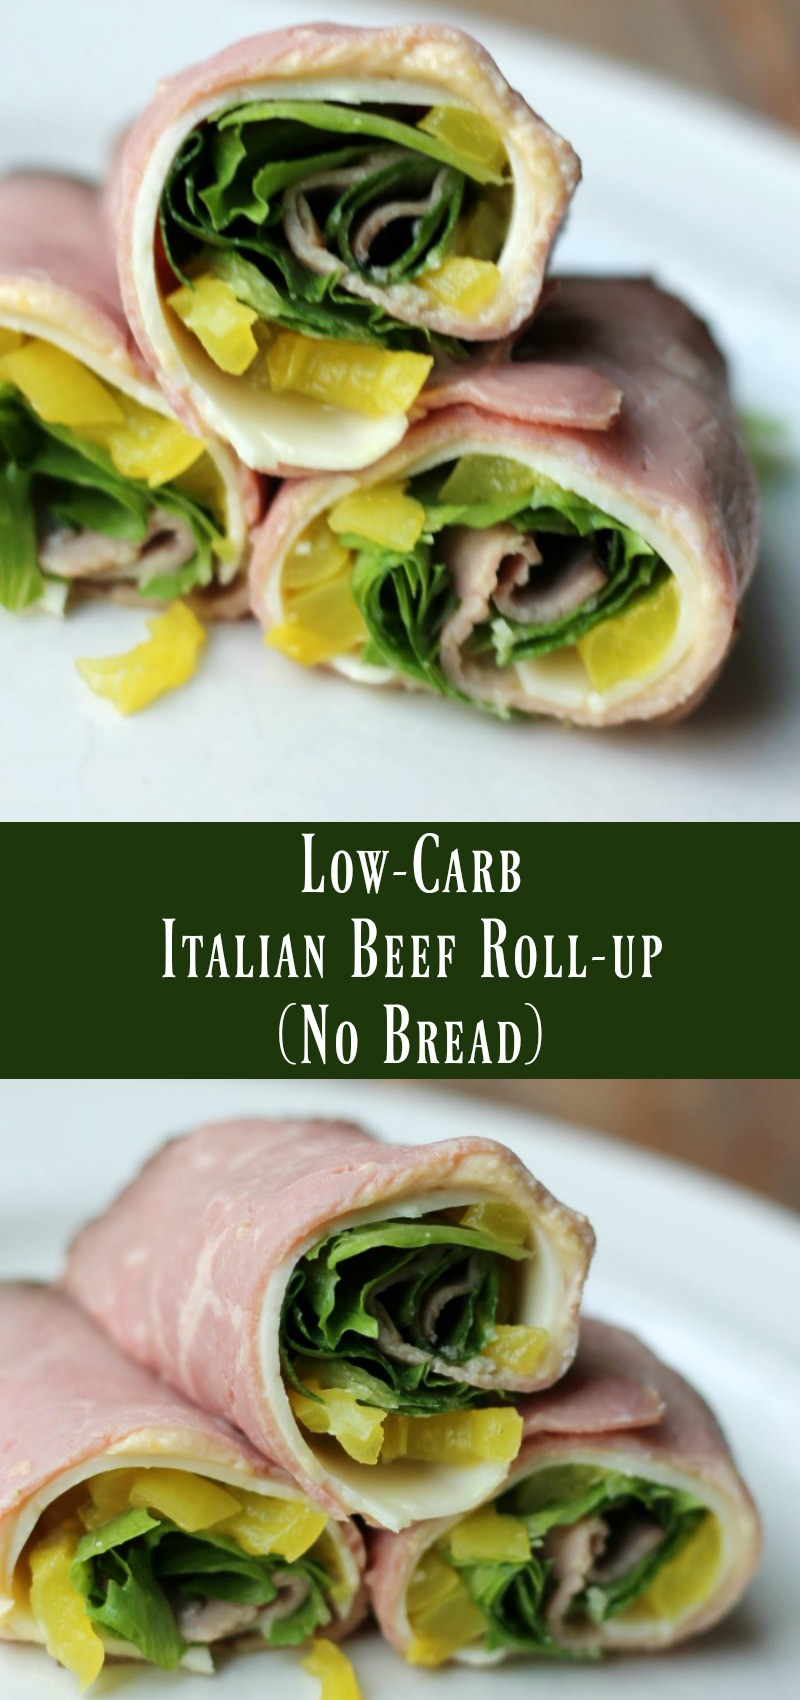 Carbs In Italian Bread
 Low carb Italian Beef Roll up Organize Yourself Skinny